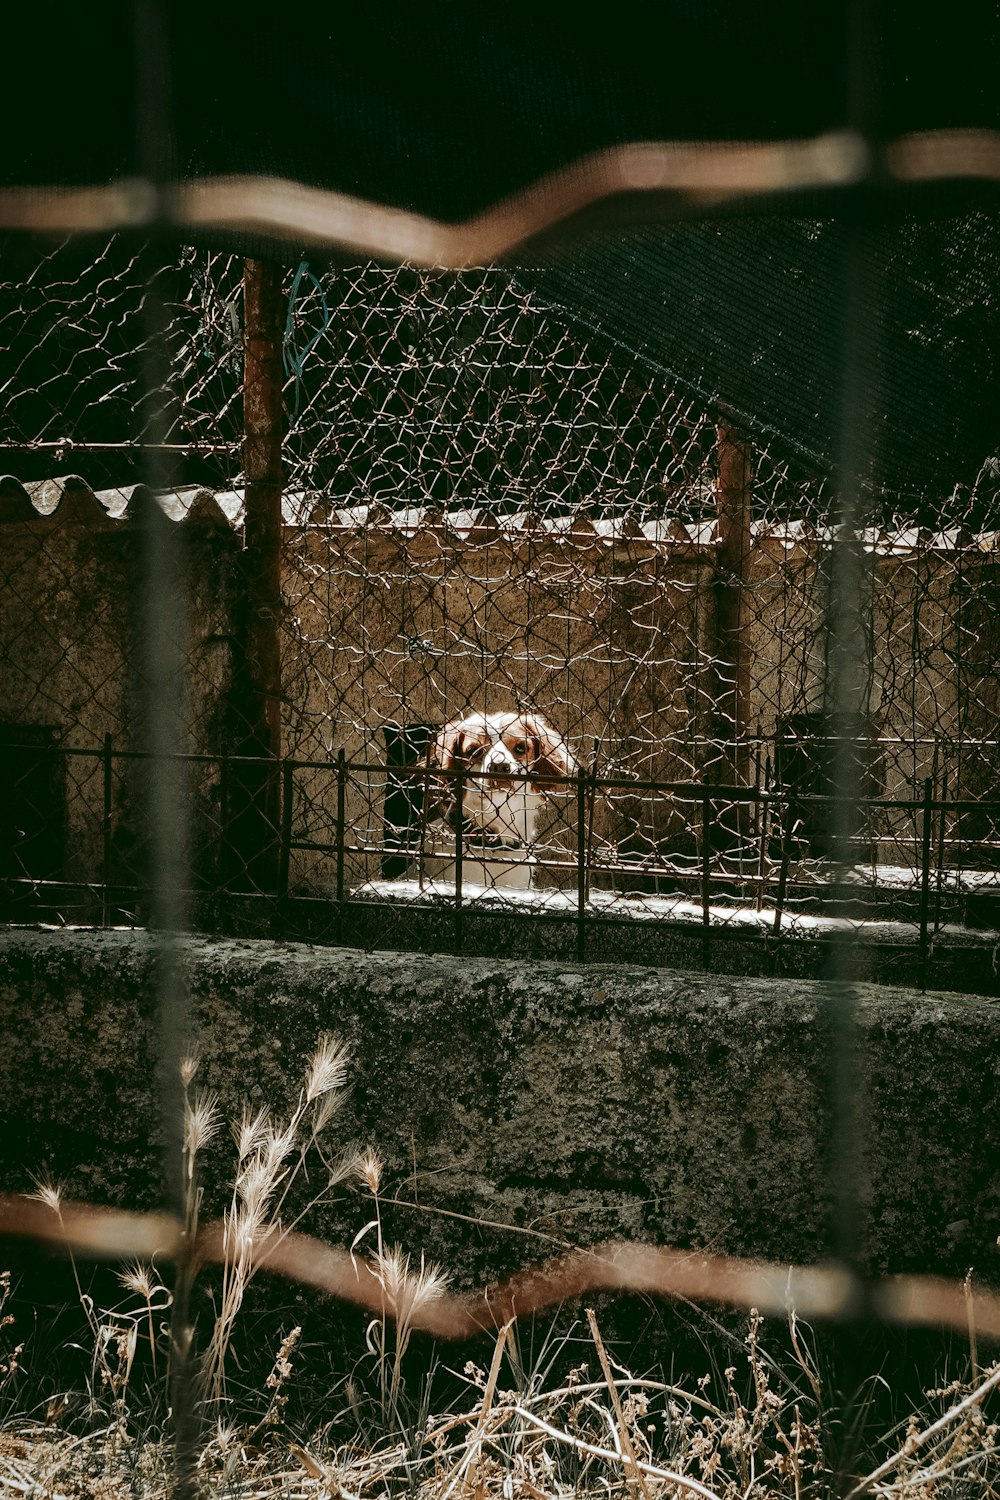 a dog behind a fence looking at the camera